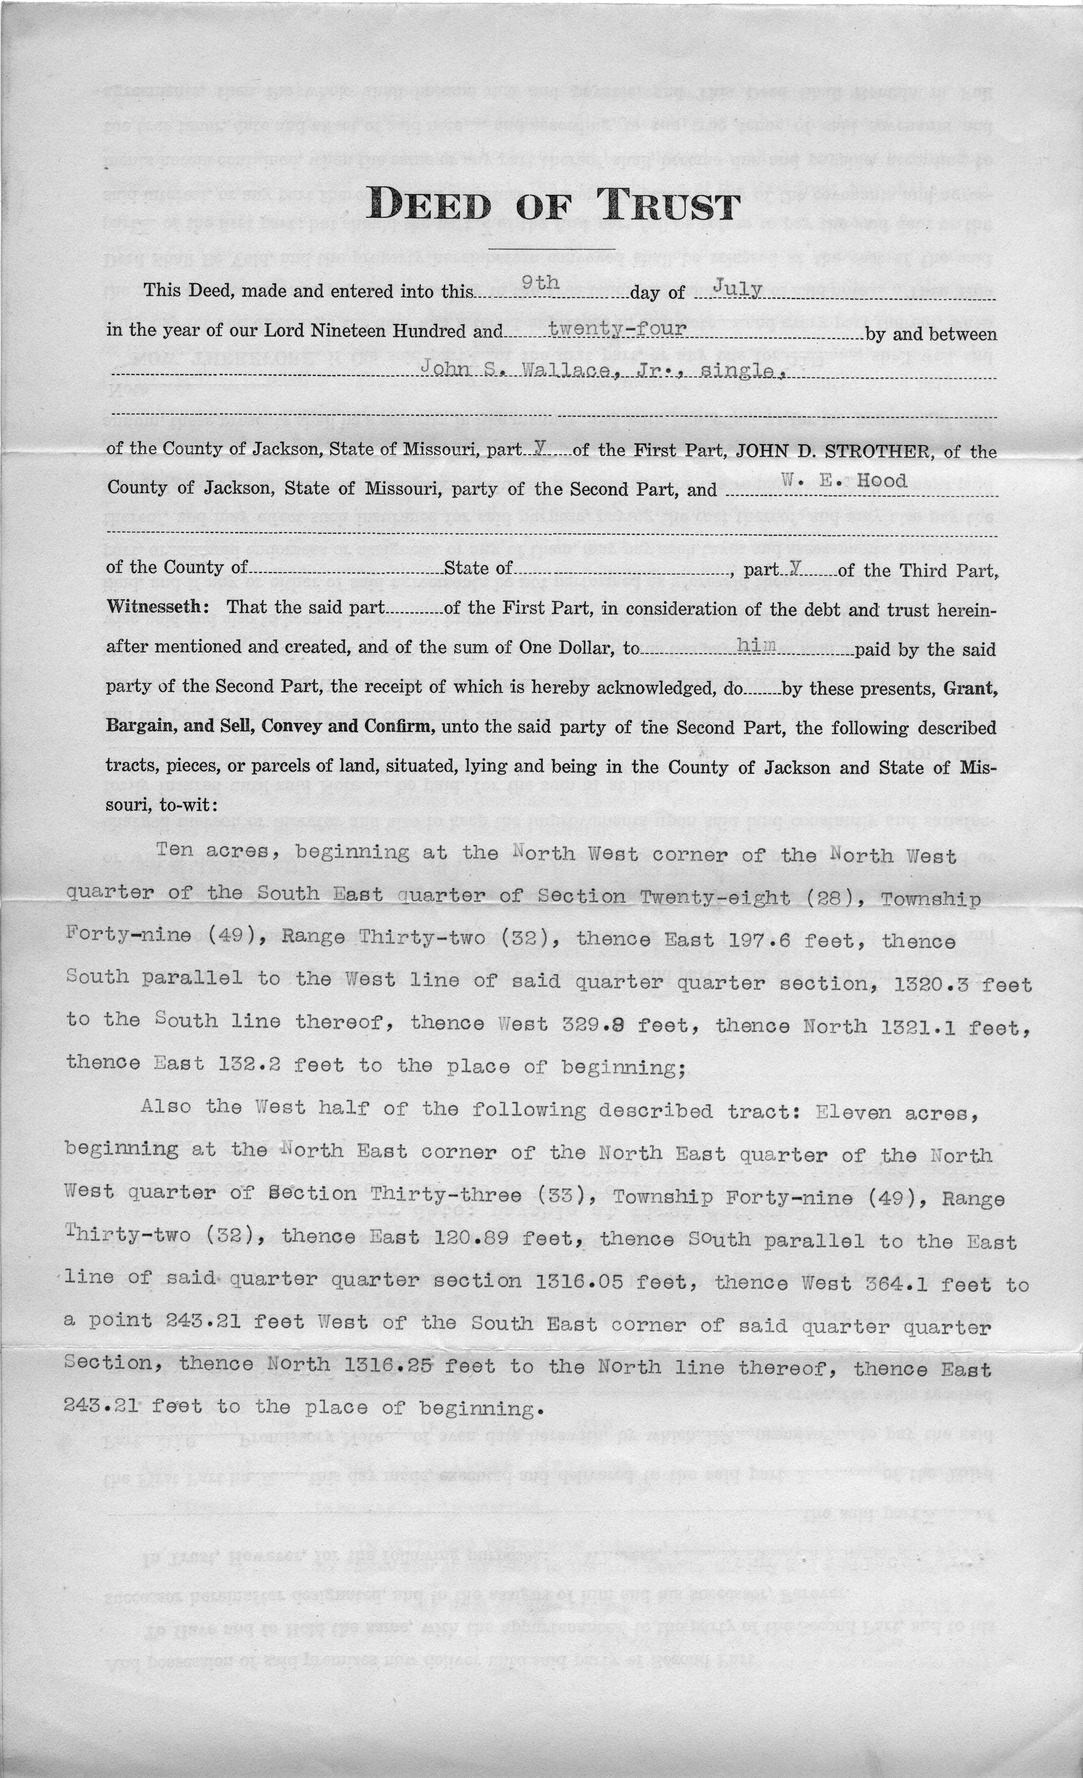 Deed of Trust from John S. Wallace, Jr. to John D. Strother for W. E. Hood